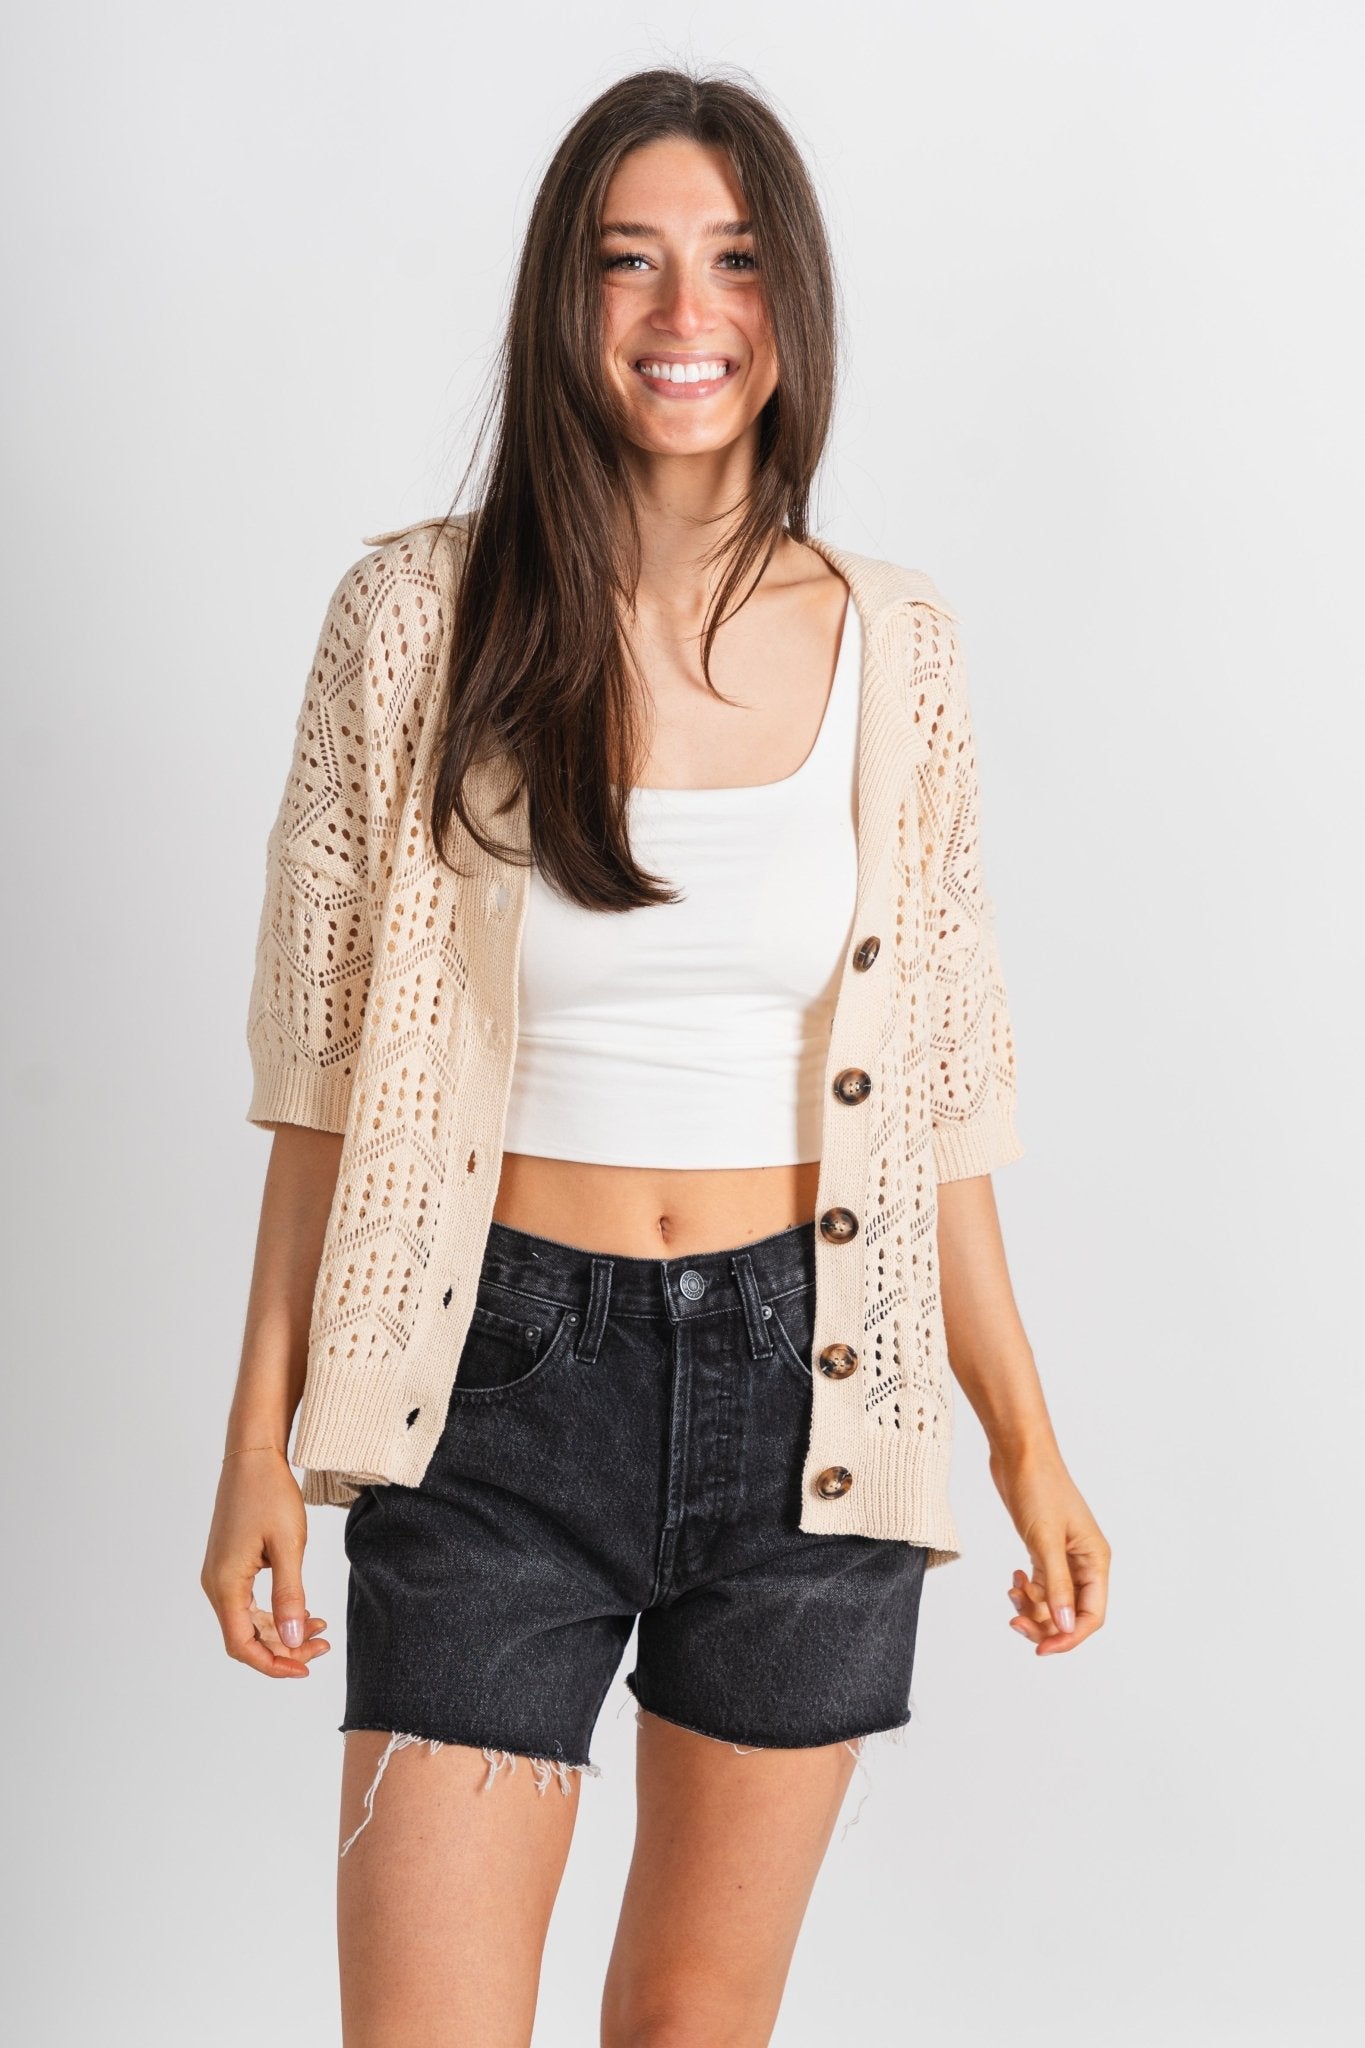 Crochet button up top cream - Cute Top - Fun Vacay Basics at Lush Fashion Lounge Boutique in Oklahoma City